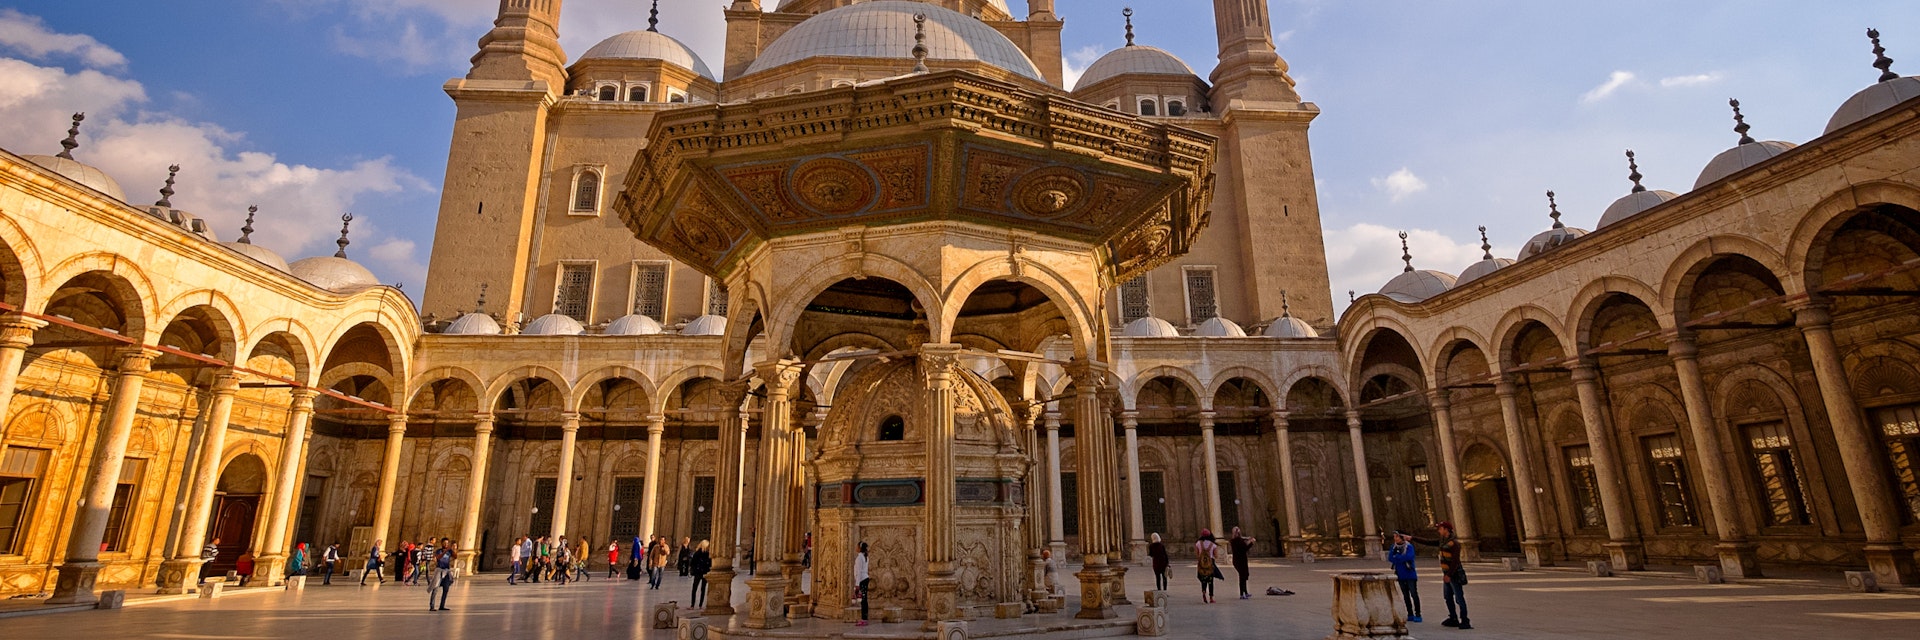 The great Mosque of Muhammad Ali Pasha or Alabaster Mosque is a mosque situated in the Citadel of Cairo in Egypt and commissioned by Muhammad Ali Pasha between 1830 and 1848.